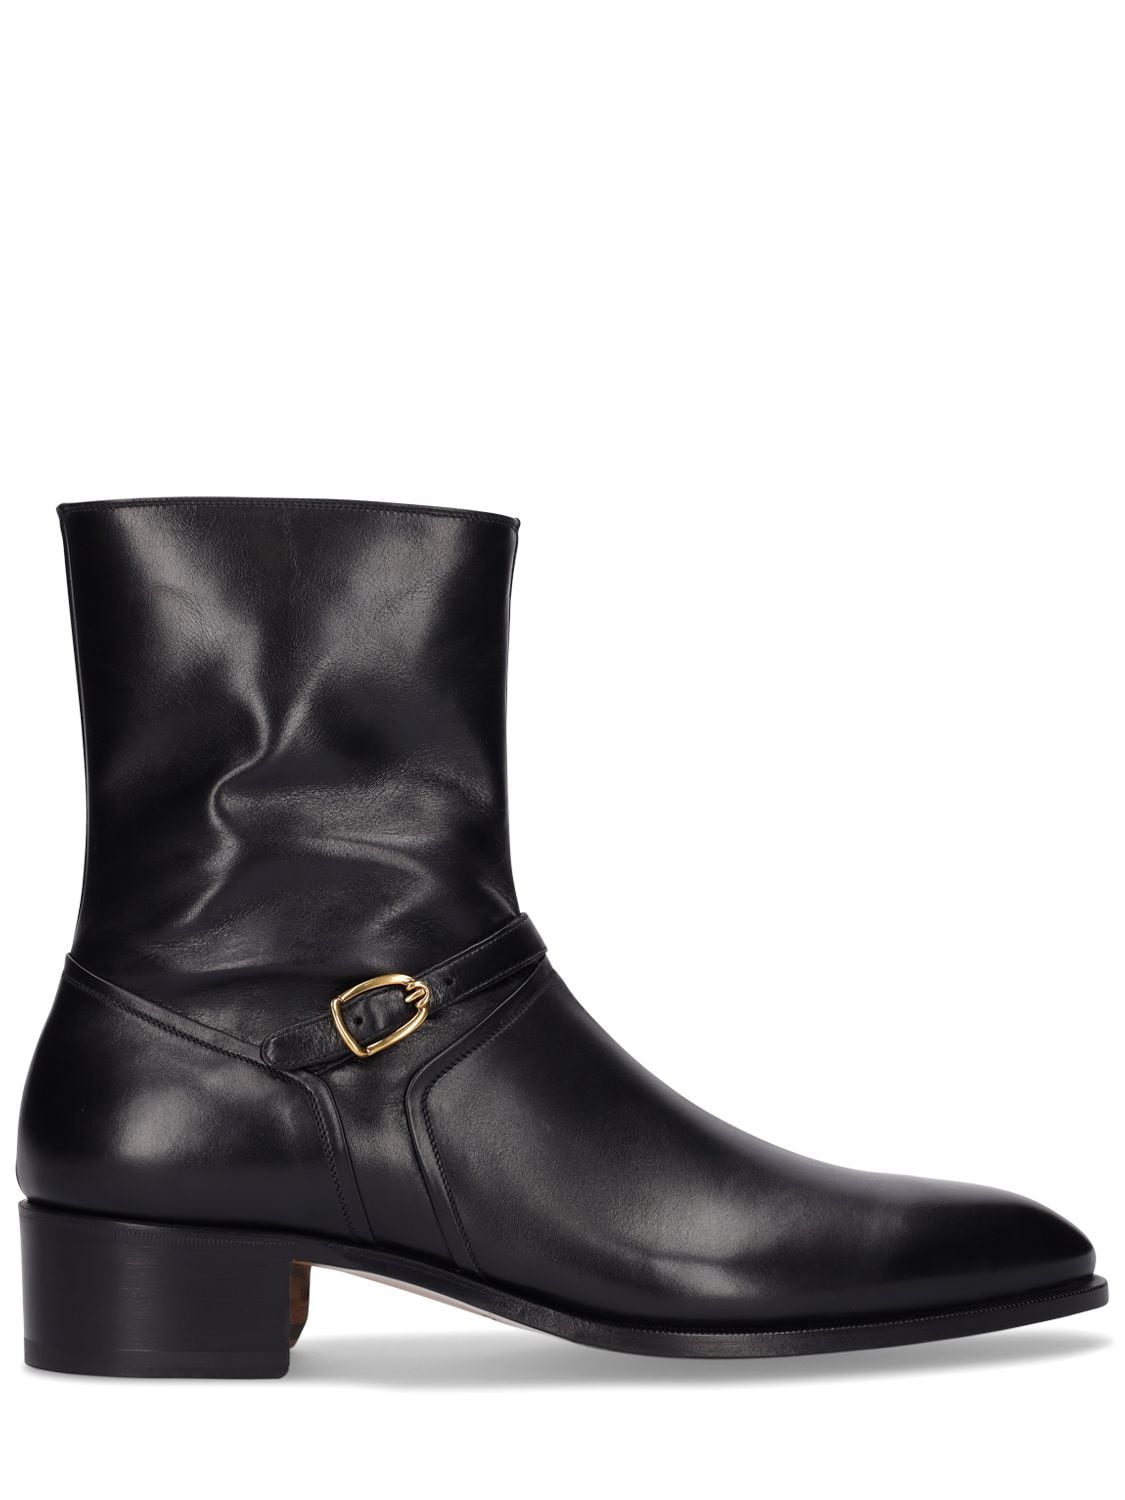 TOM FORD LEATHER ANKLE BOOTS